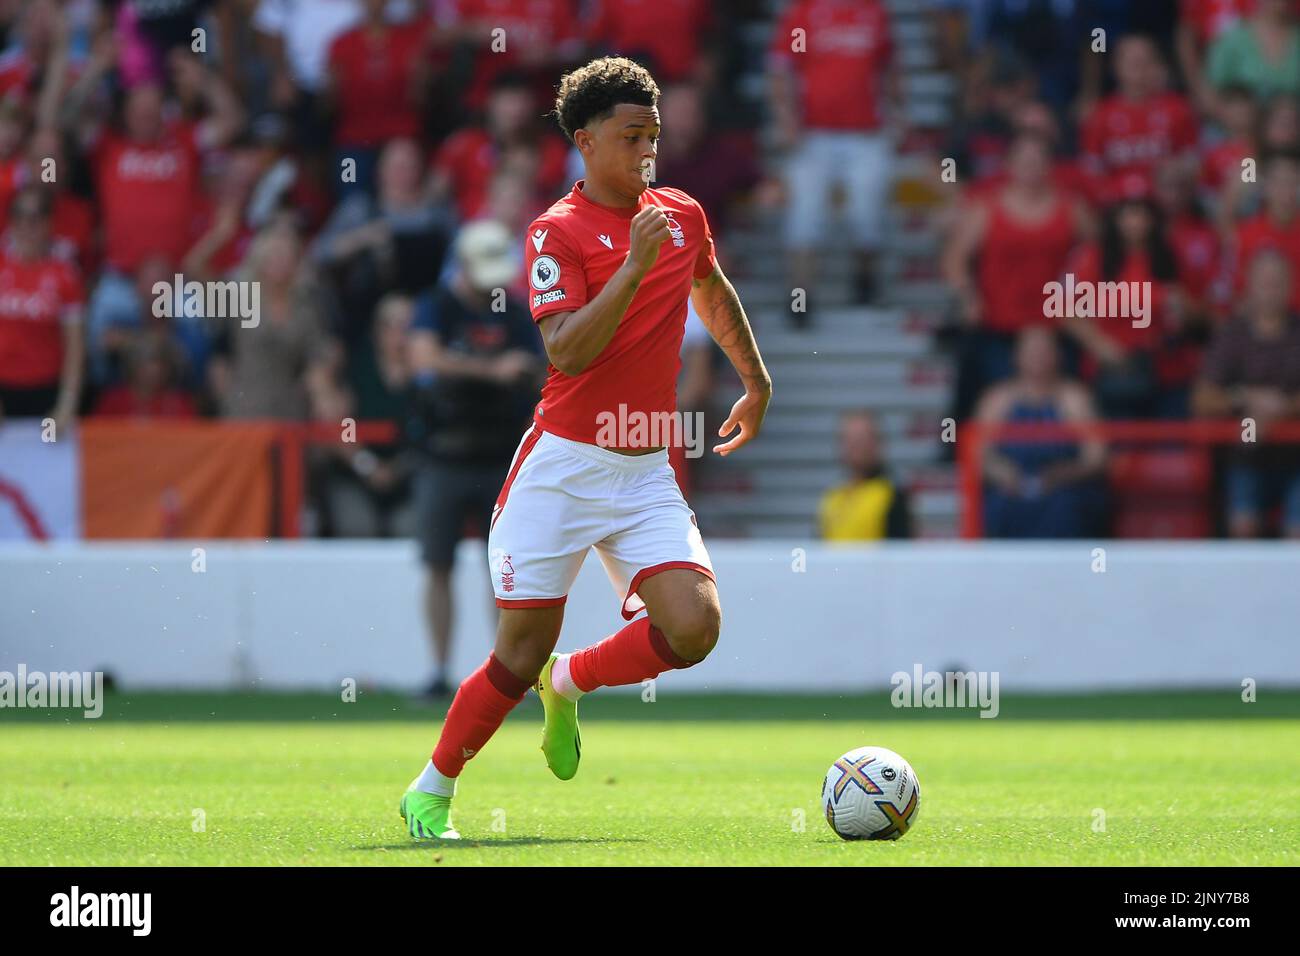 Nottingham, UK. 14th August 2022Brennan Johnson of Nottingham Forest in action during the Premier League match between Nottingham Forest and West Ham United at the City Ground, Nottingham on Sunday 14th August 2022. (Credit: Jon Hobley | MI News) Credit: MI News & Sport /Alamy Live News Stock Photo